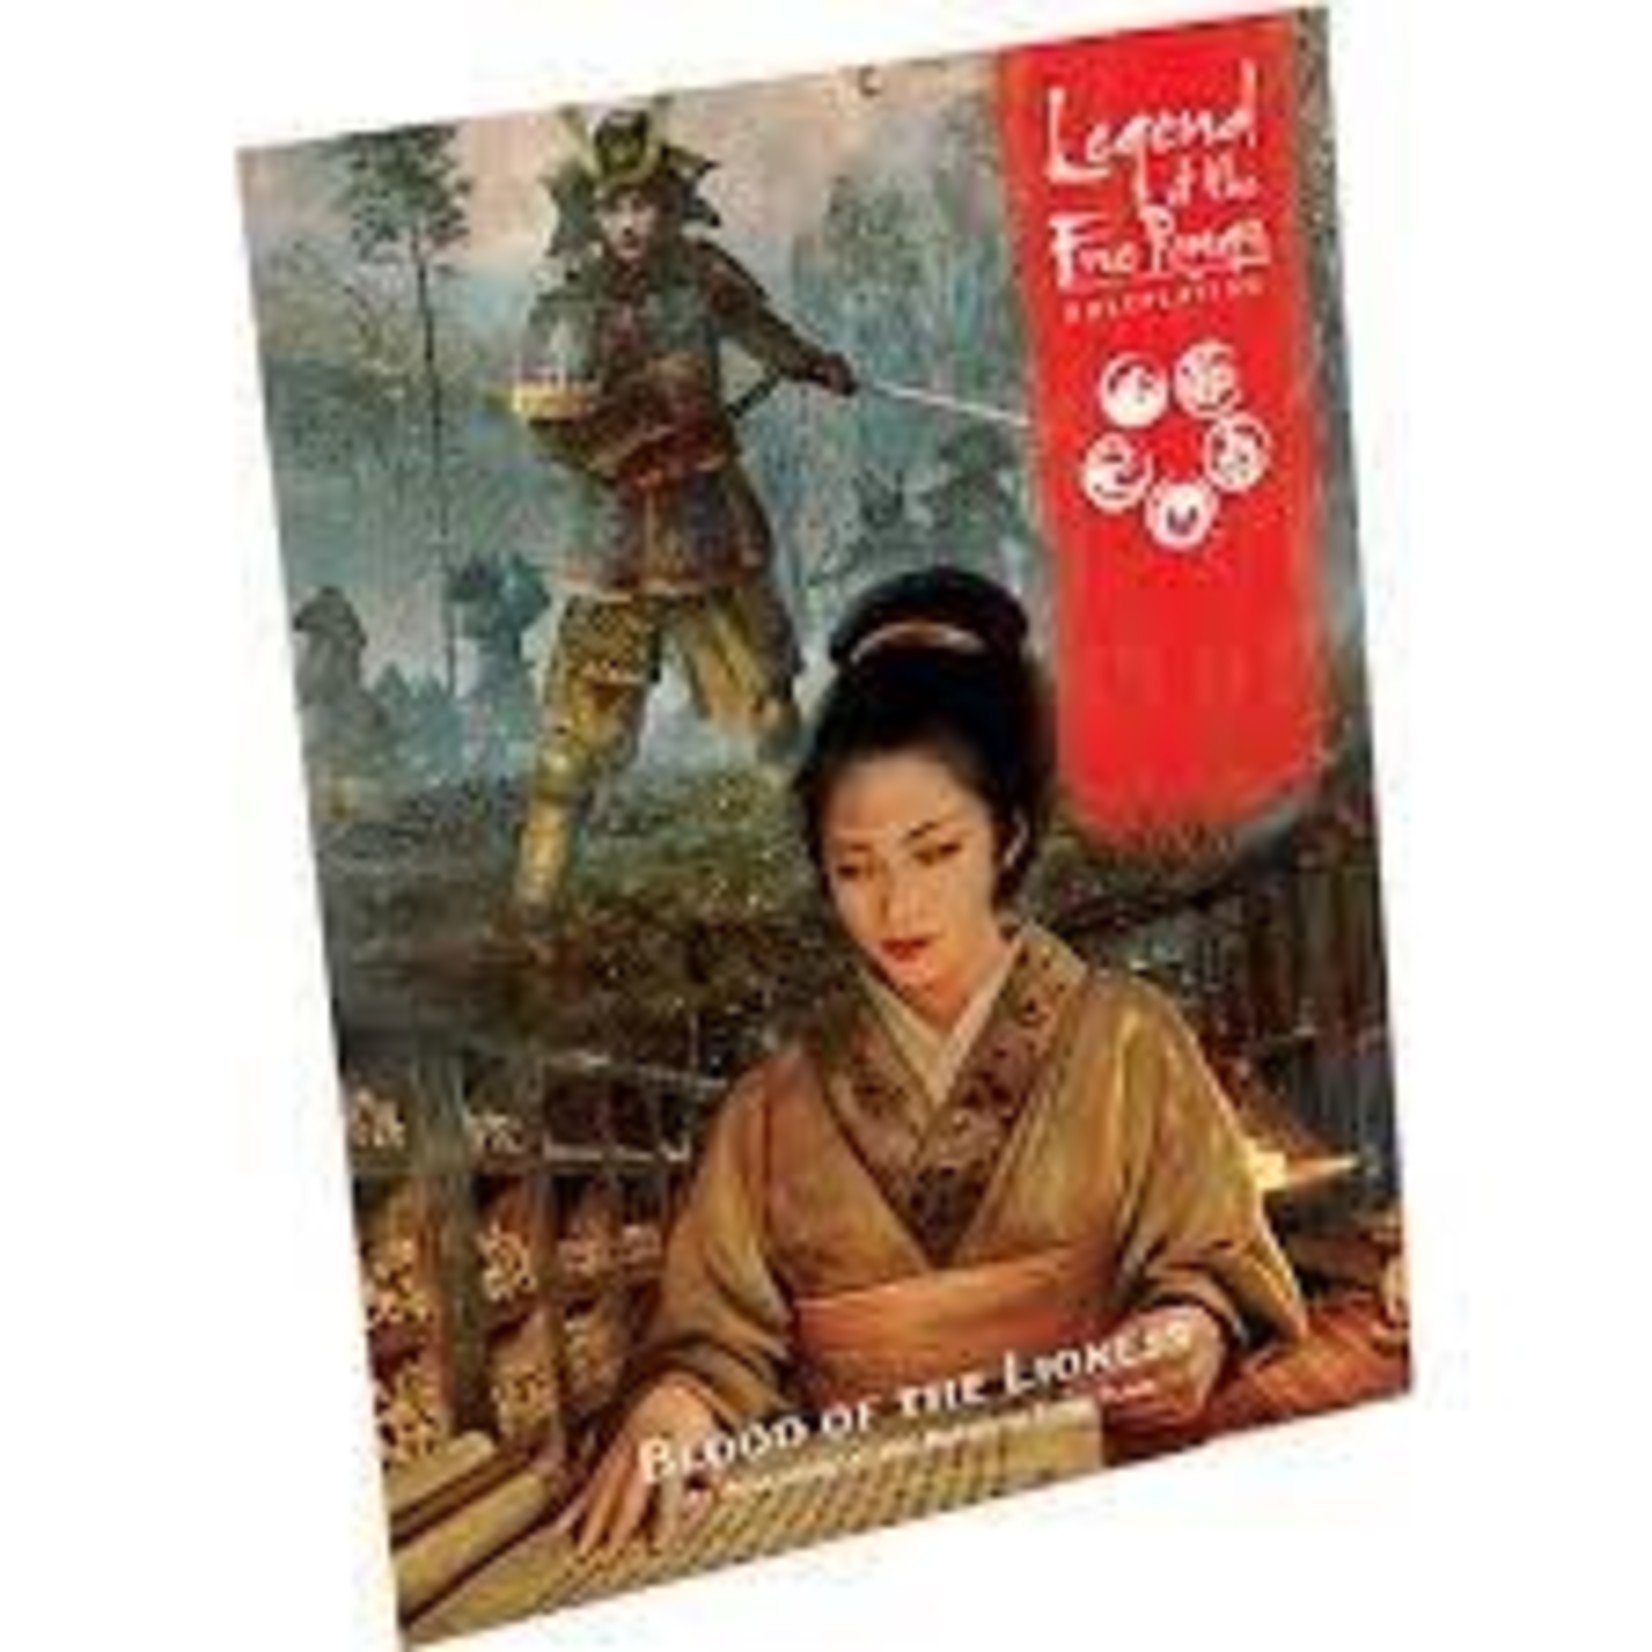 Fantasy Flight Games Legend of the Five Rings Blood of the Lioness